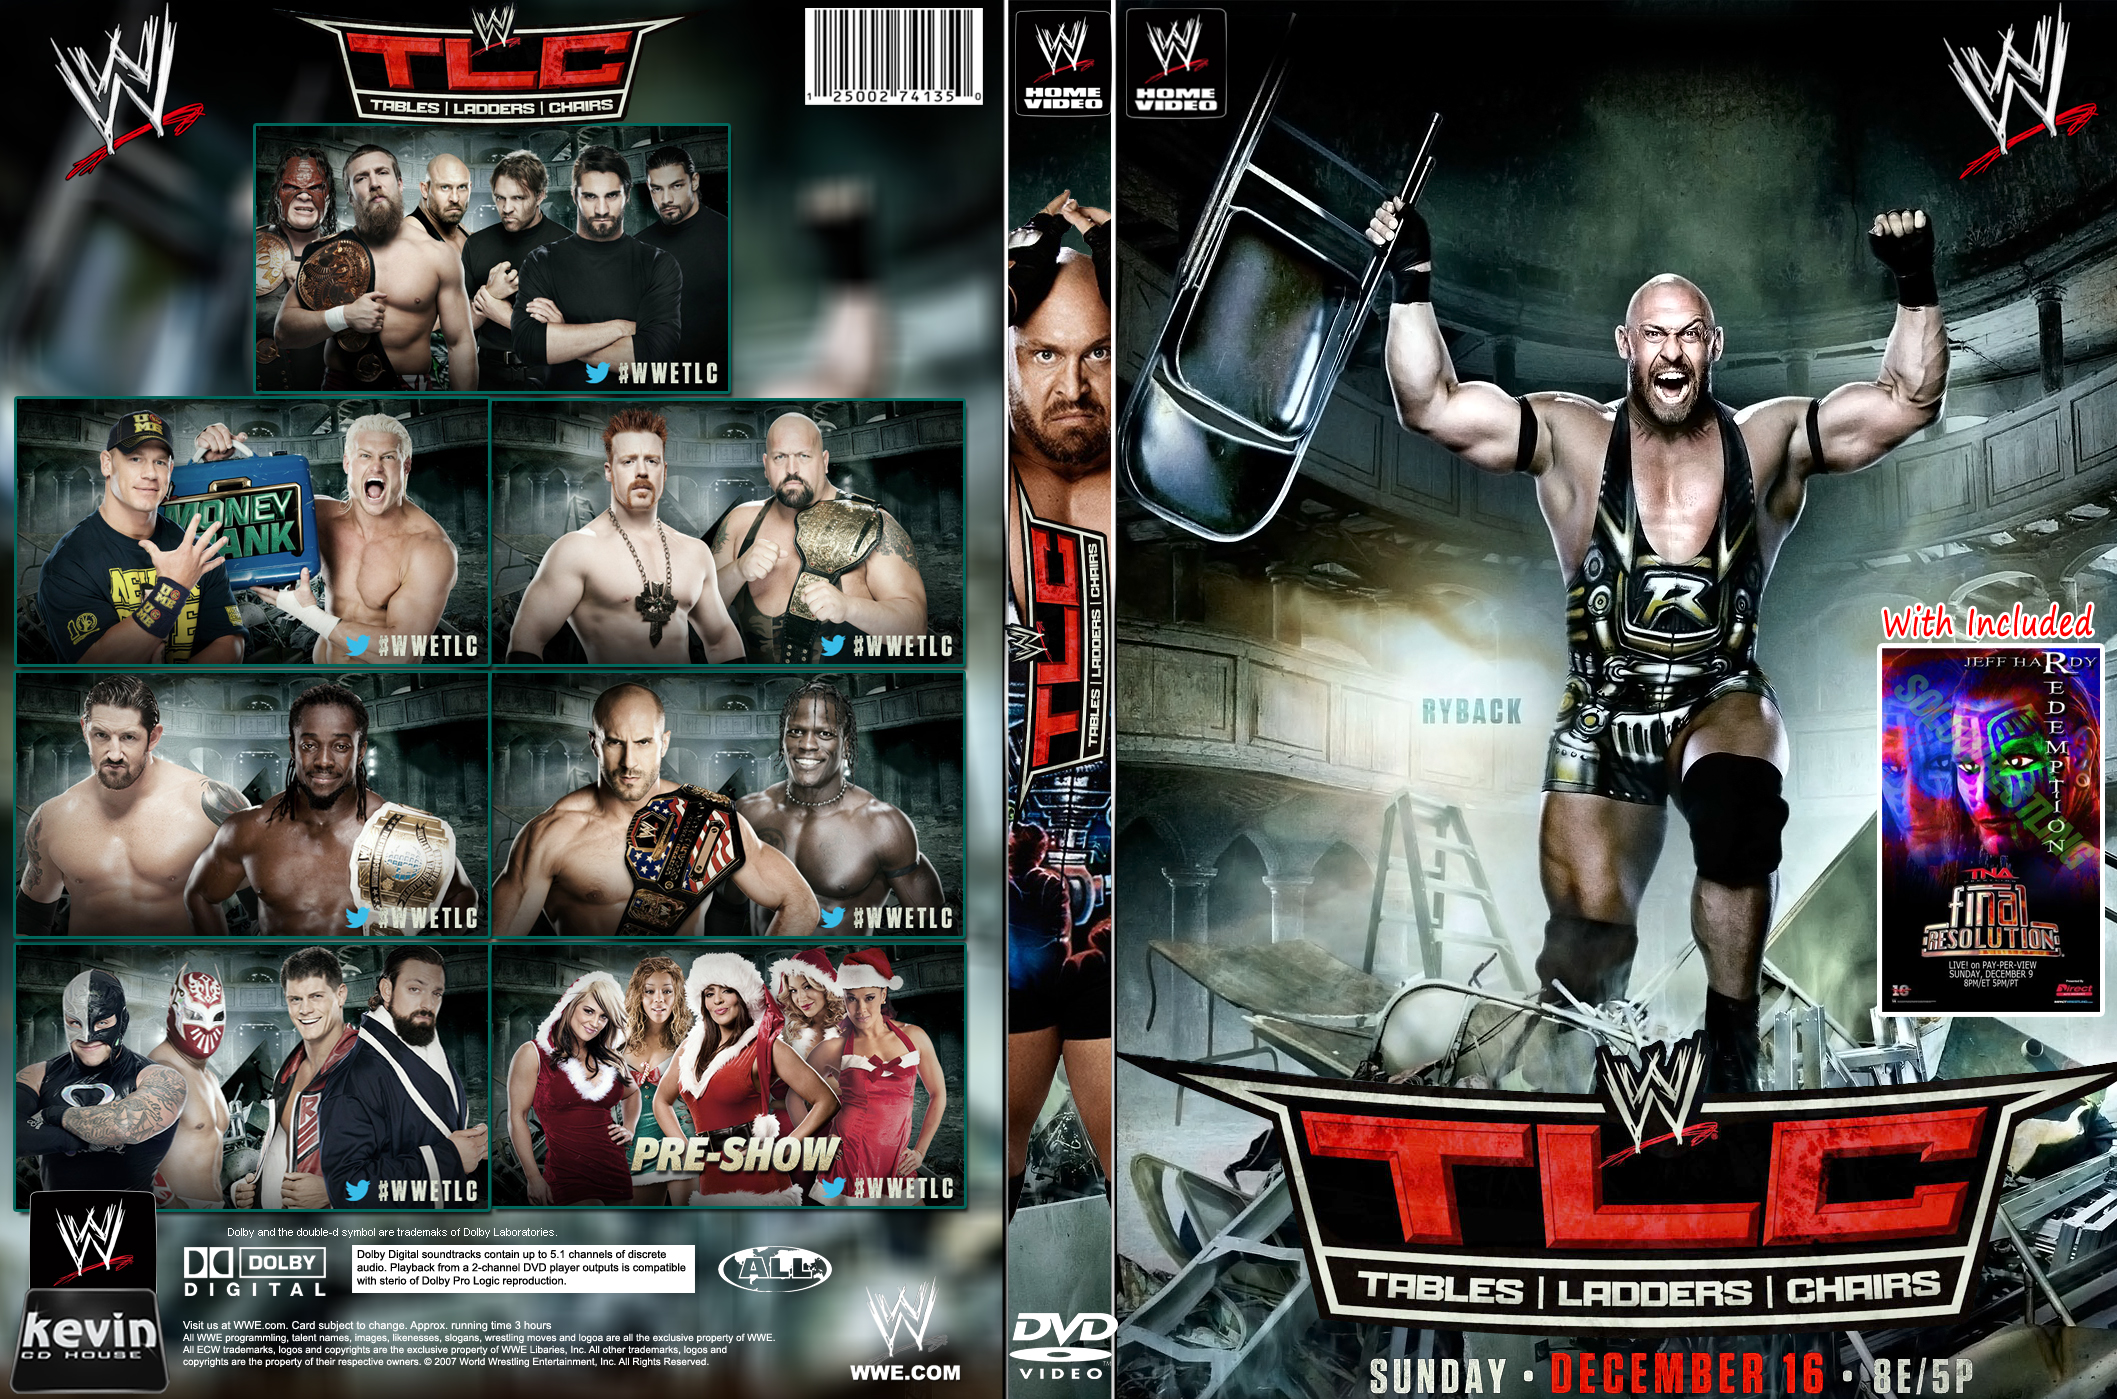 WWE TLC: Tables Ladders & Chairs 2012 #3